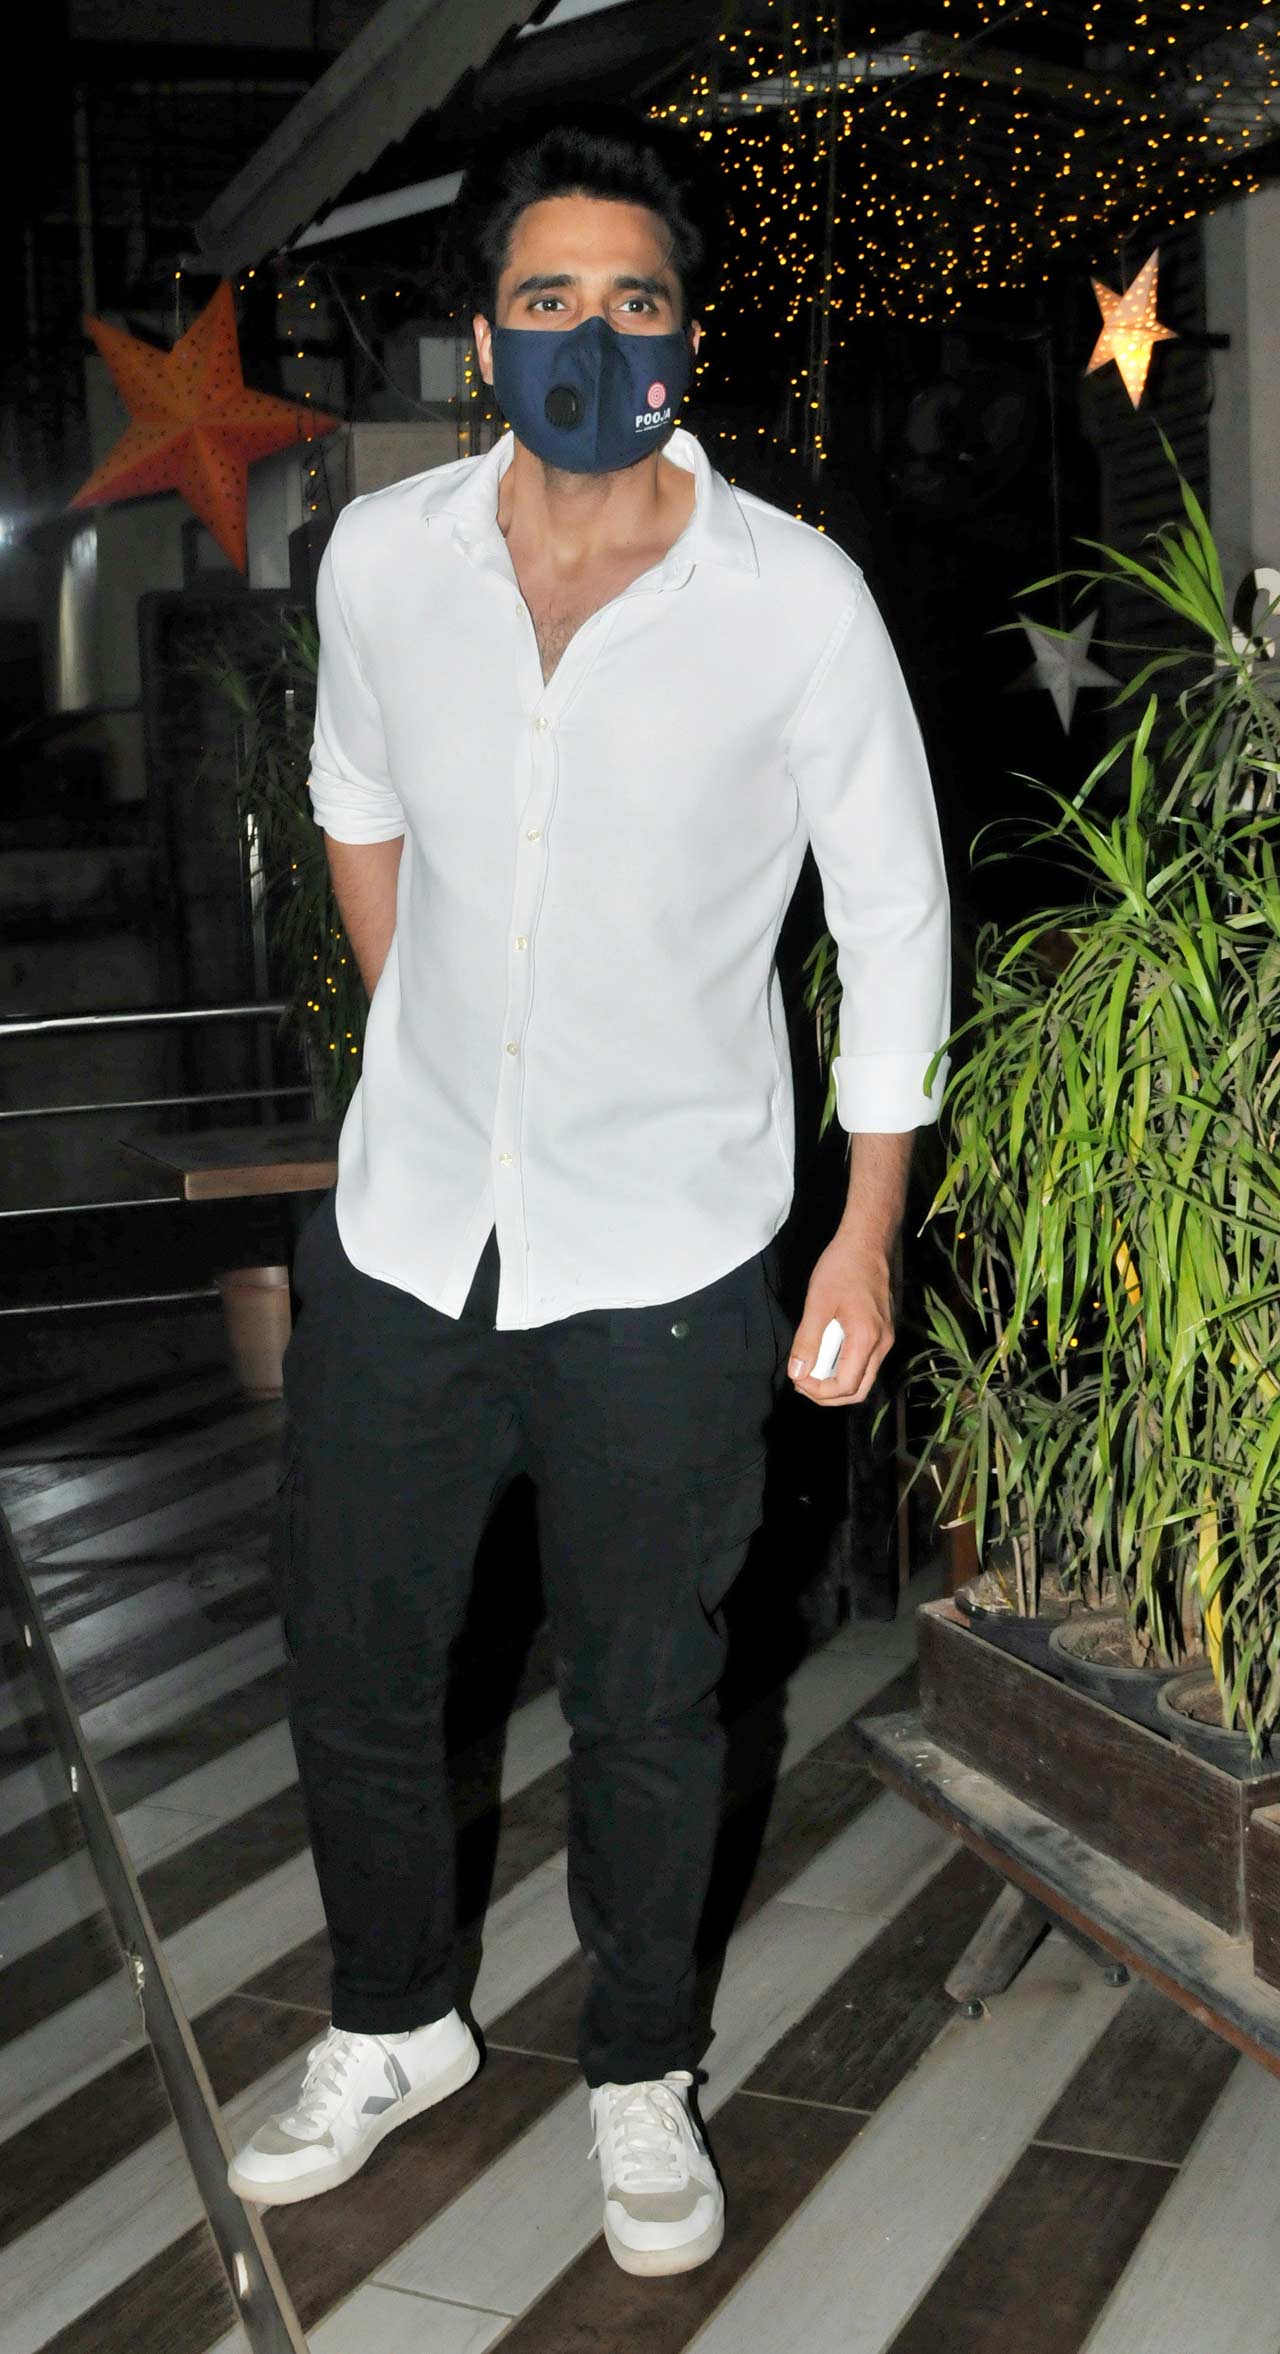 Jackky Bhagnani was snapped in his uber-cool avatar in Mumbai.